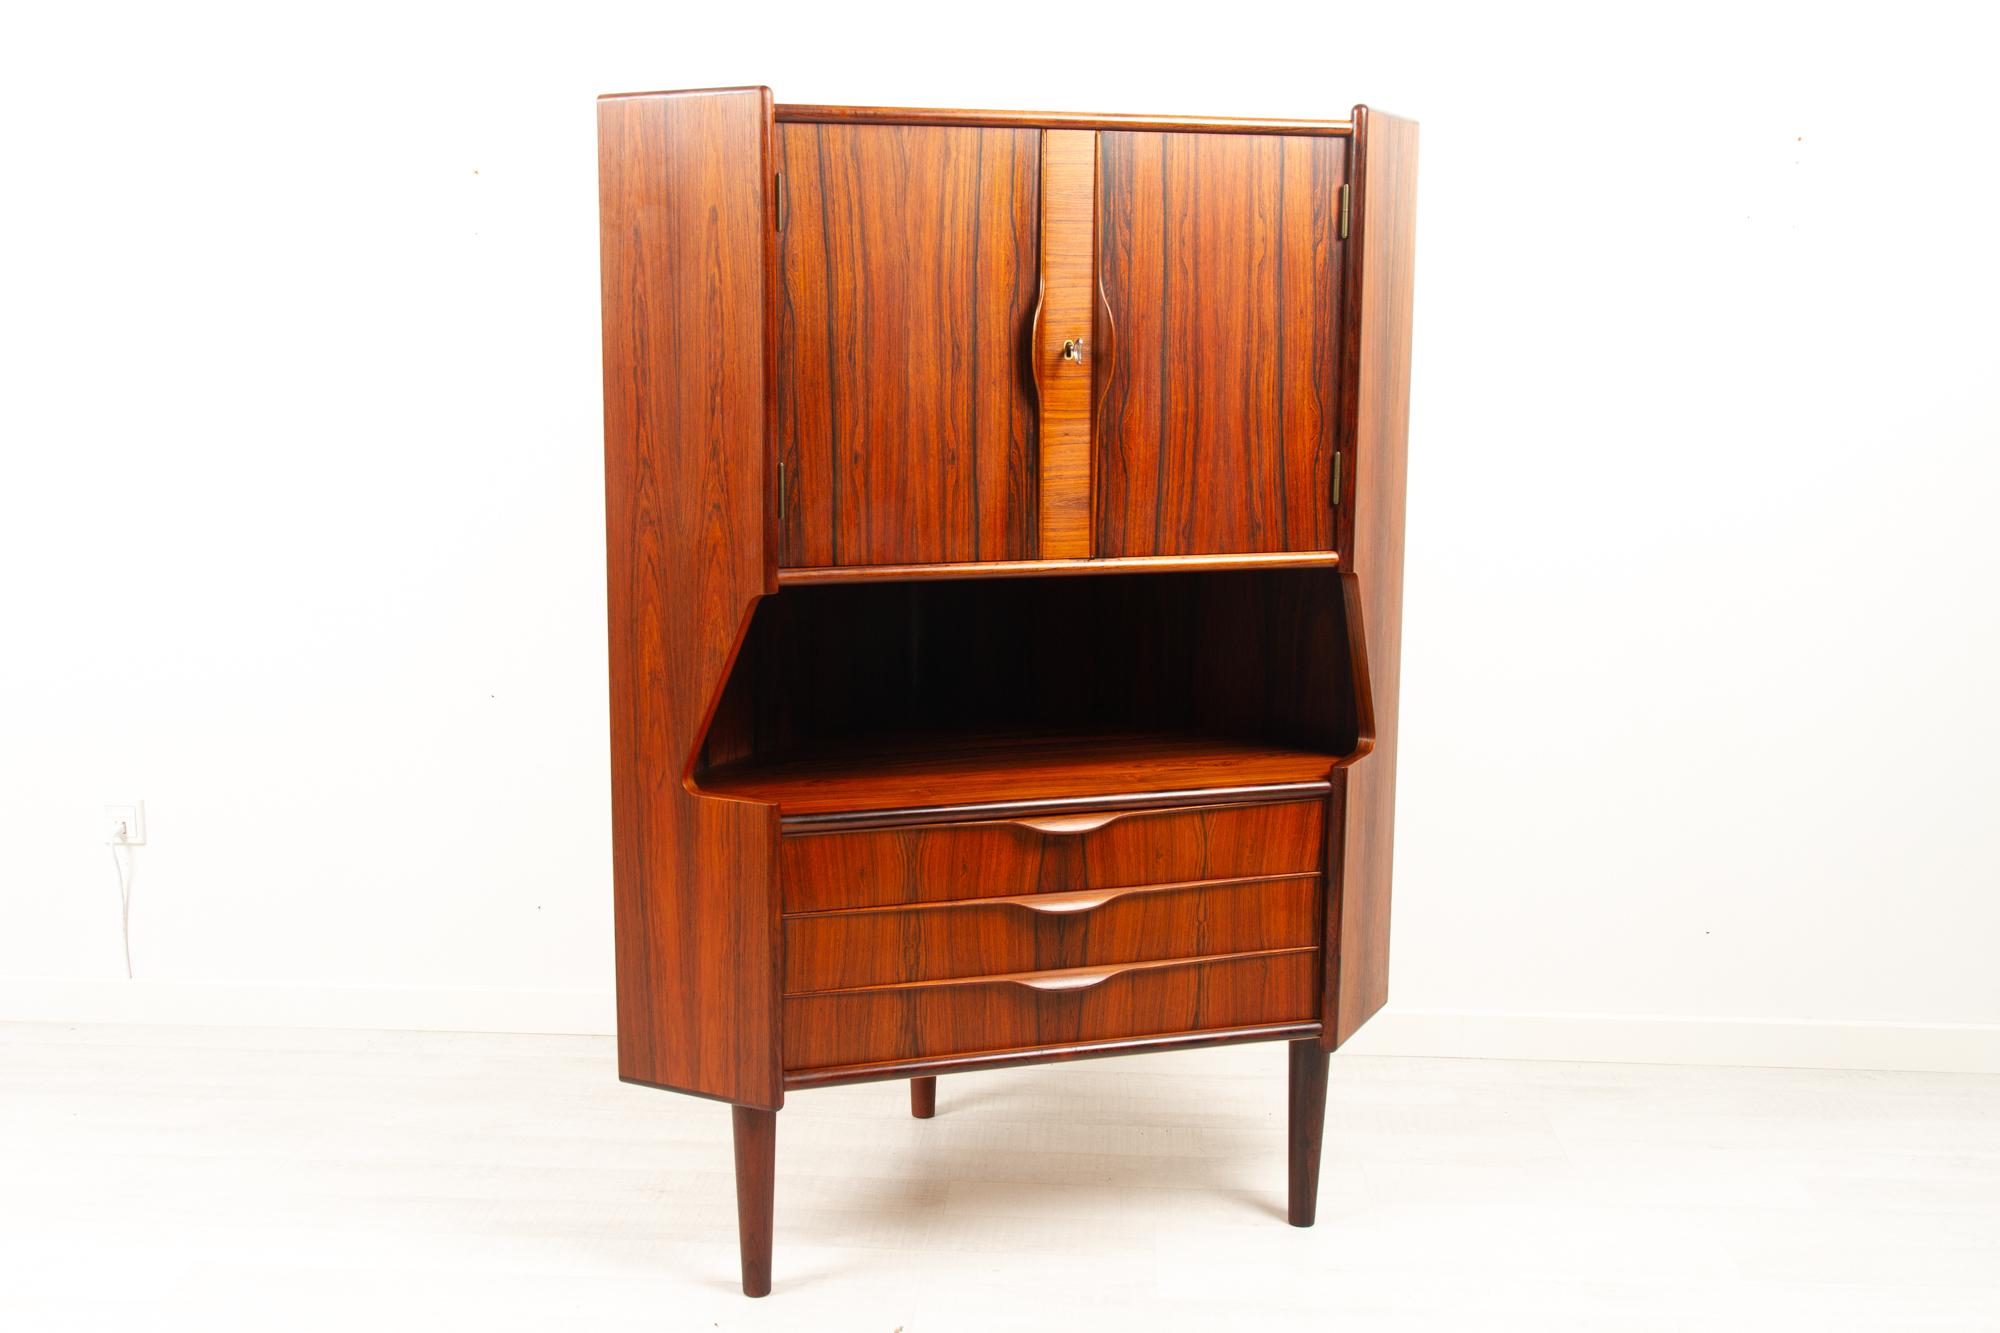 Vintage Danish rosewood corner cabinet with dry bar, 1960s
Danish Mid-Century Modern corner cabinet with bar unit and drawers. Cabinet behind double doors with lock and key. Inside decorated mirror and curved shelf. Amble space for glasses and